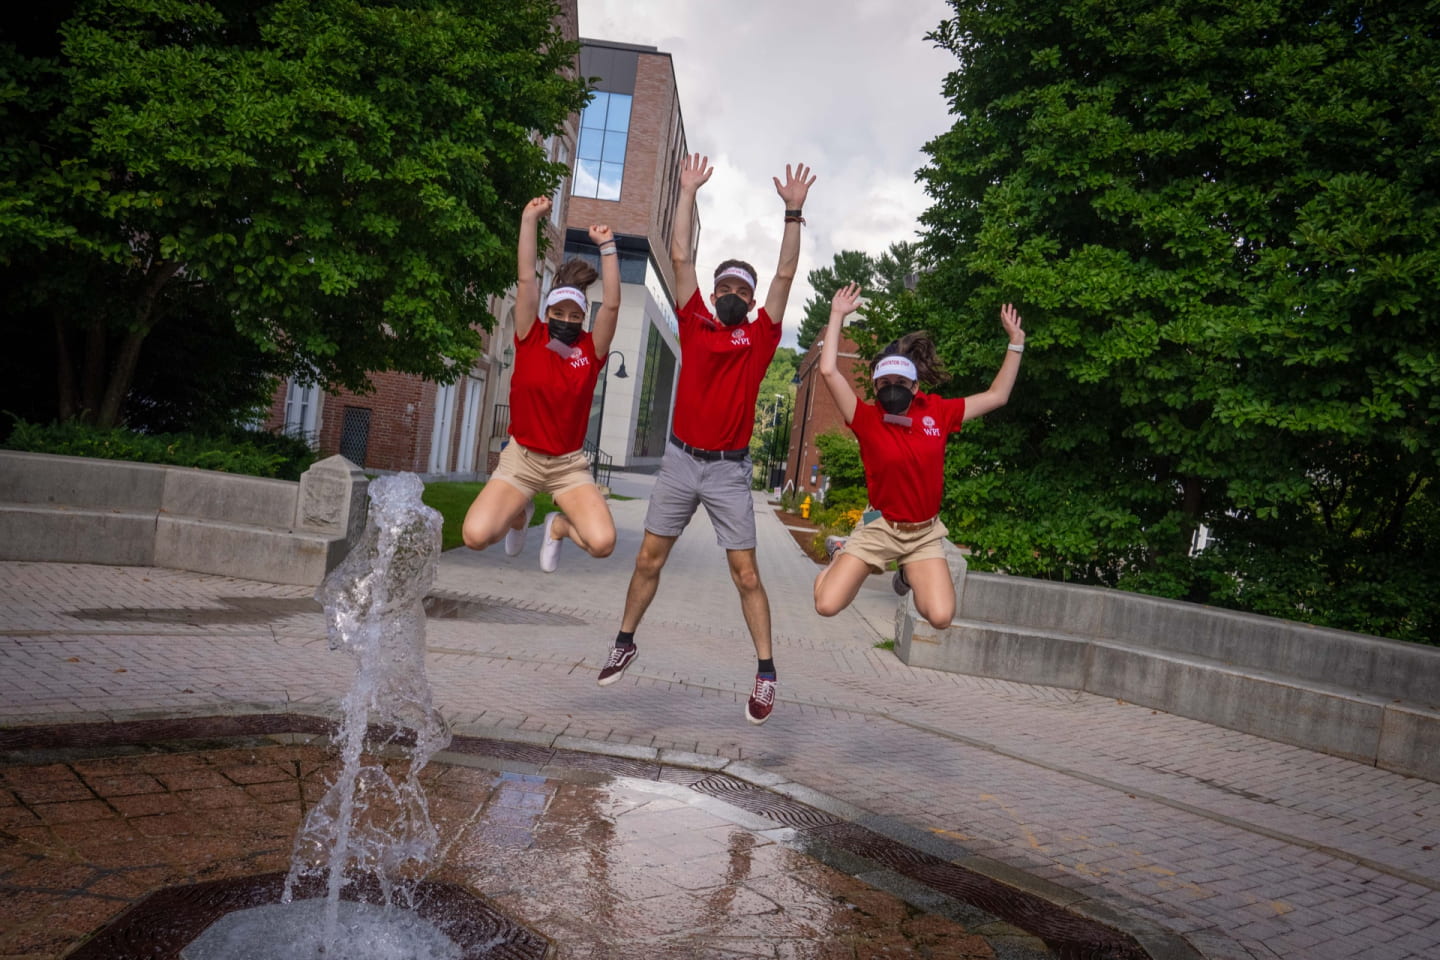 Students jumping at the Fountain